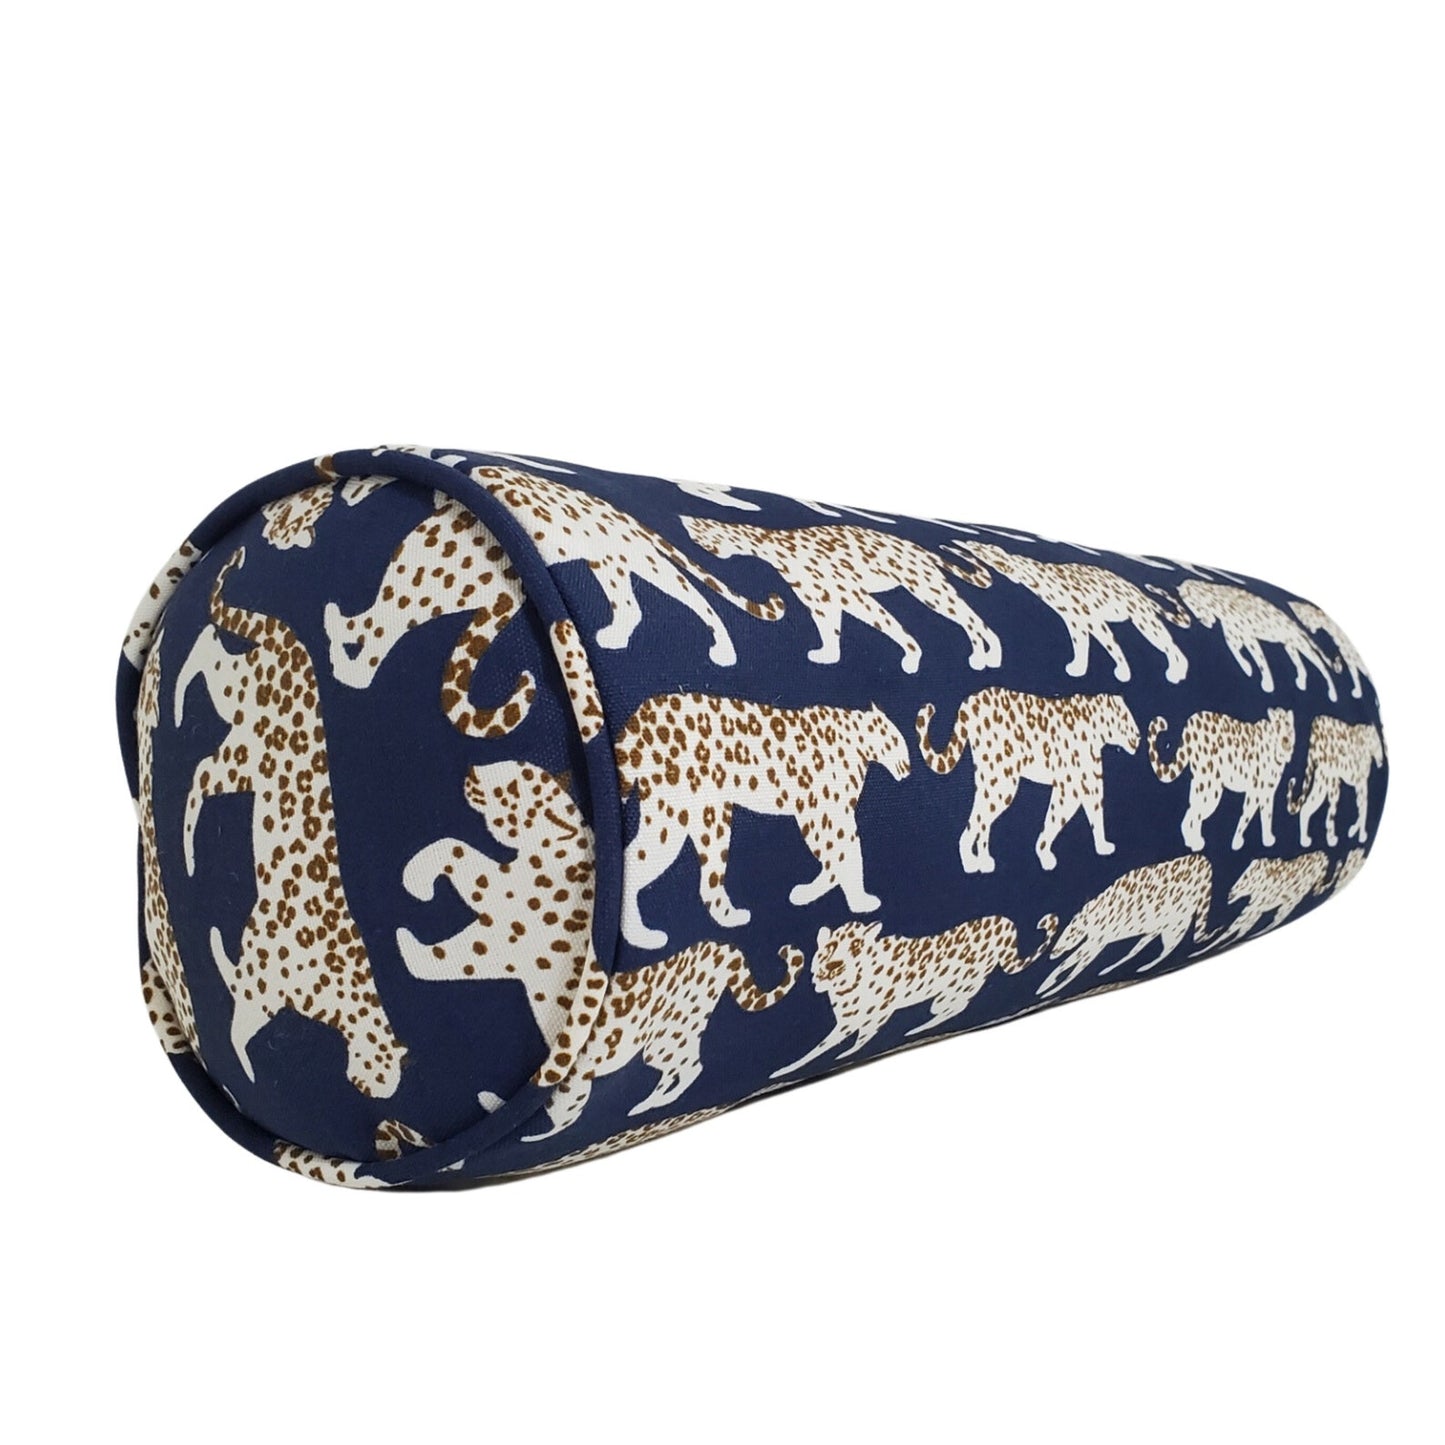 Walking on the Wild Side Outdoor Pillow Cover in Navy - OEKO TEX Sustainable / Available in Throw, Lumbar, Bolster Pillow Covers